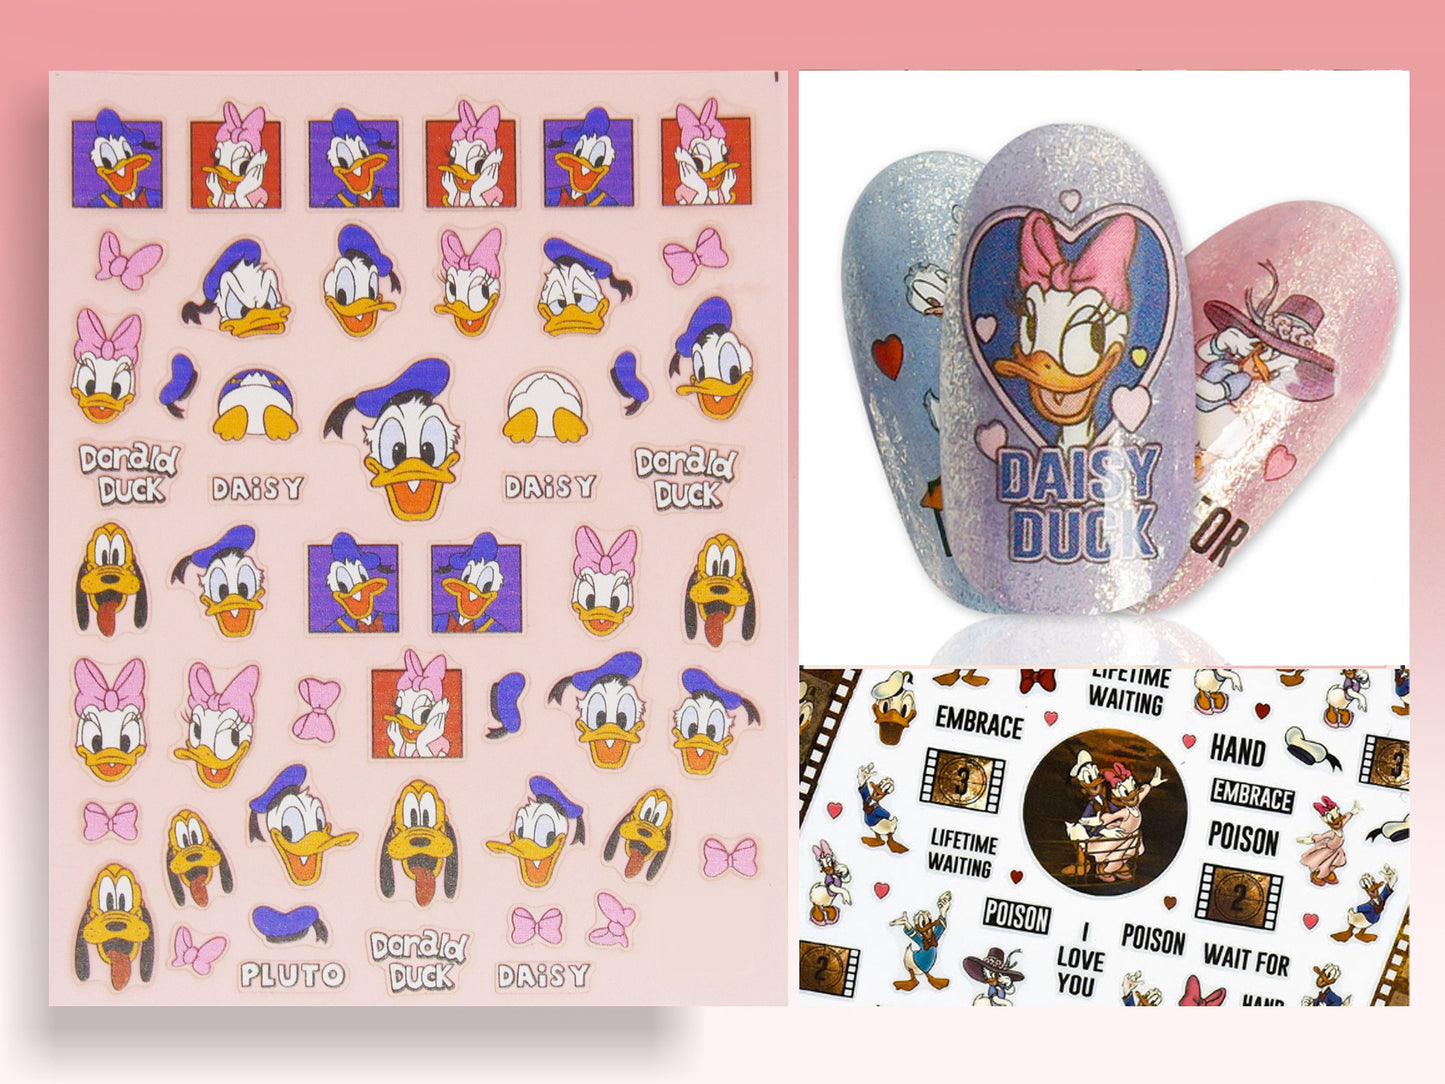 Donald Duck Nail Decals/ Disney Theme nail sticker – MakyNailSupply